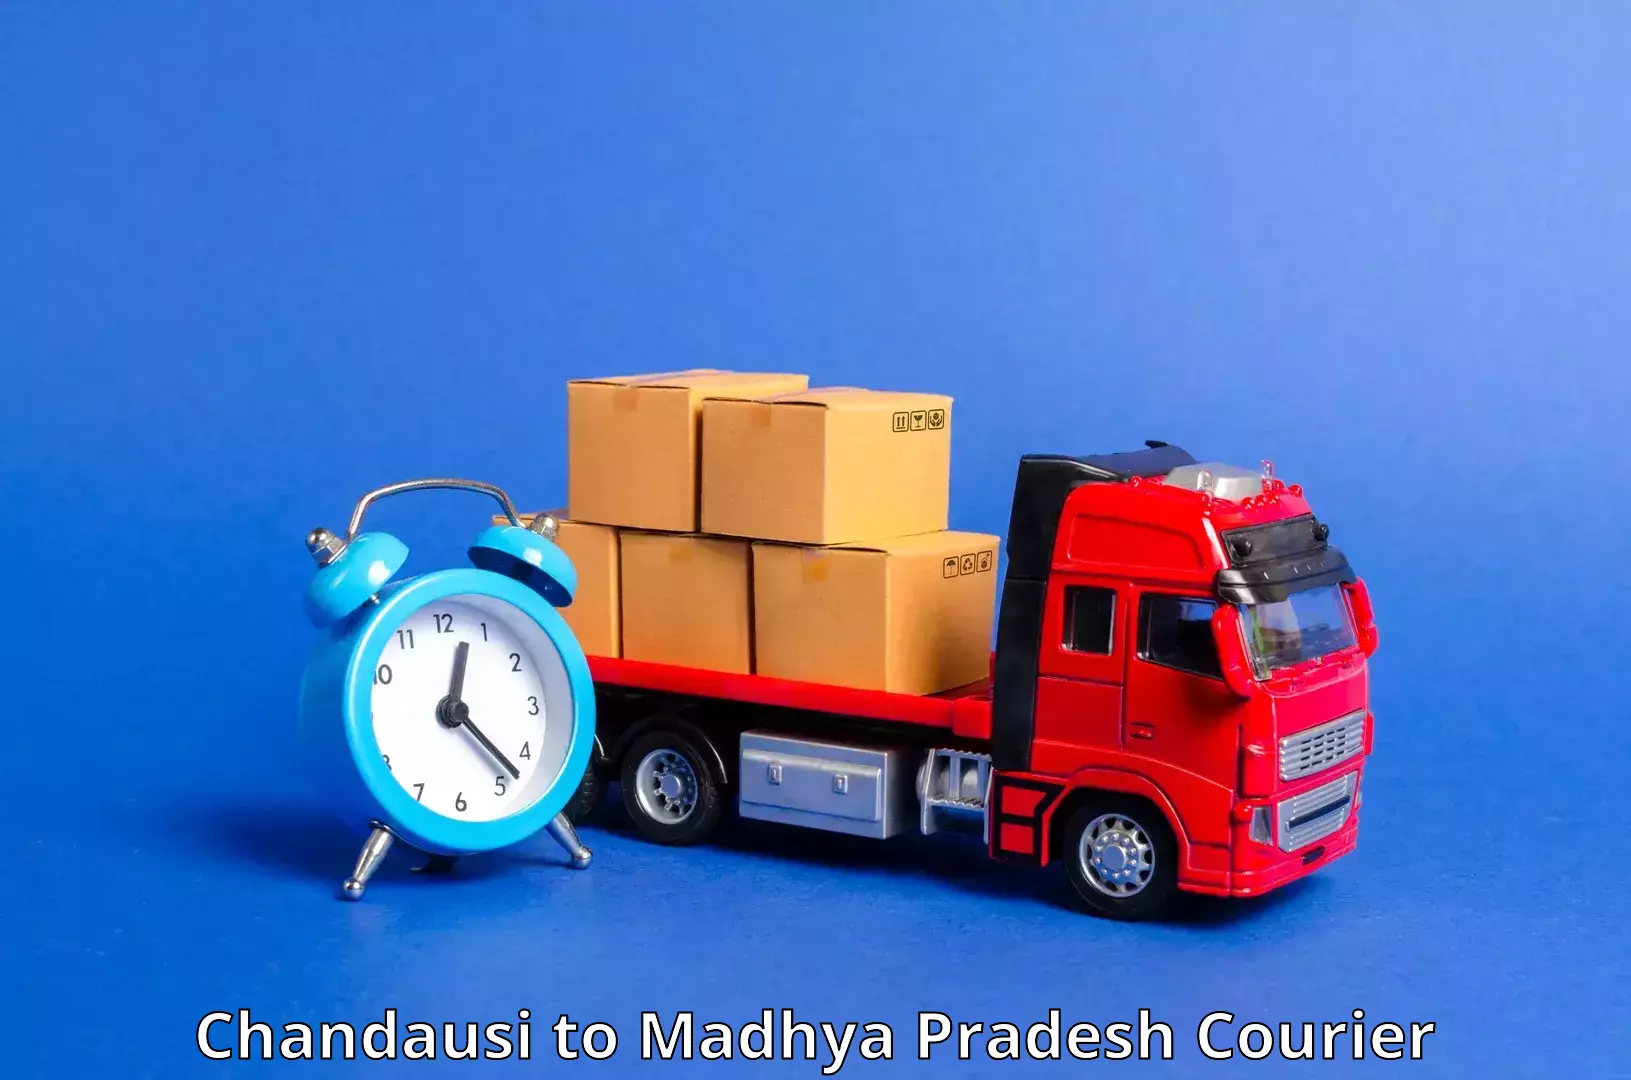 Express mail service Chandausi to Indore